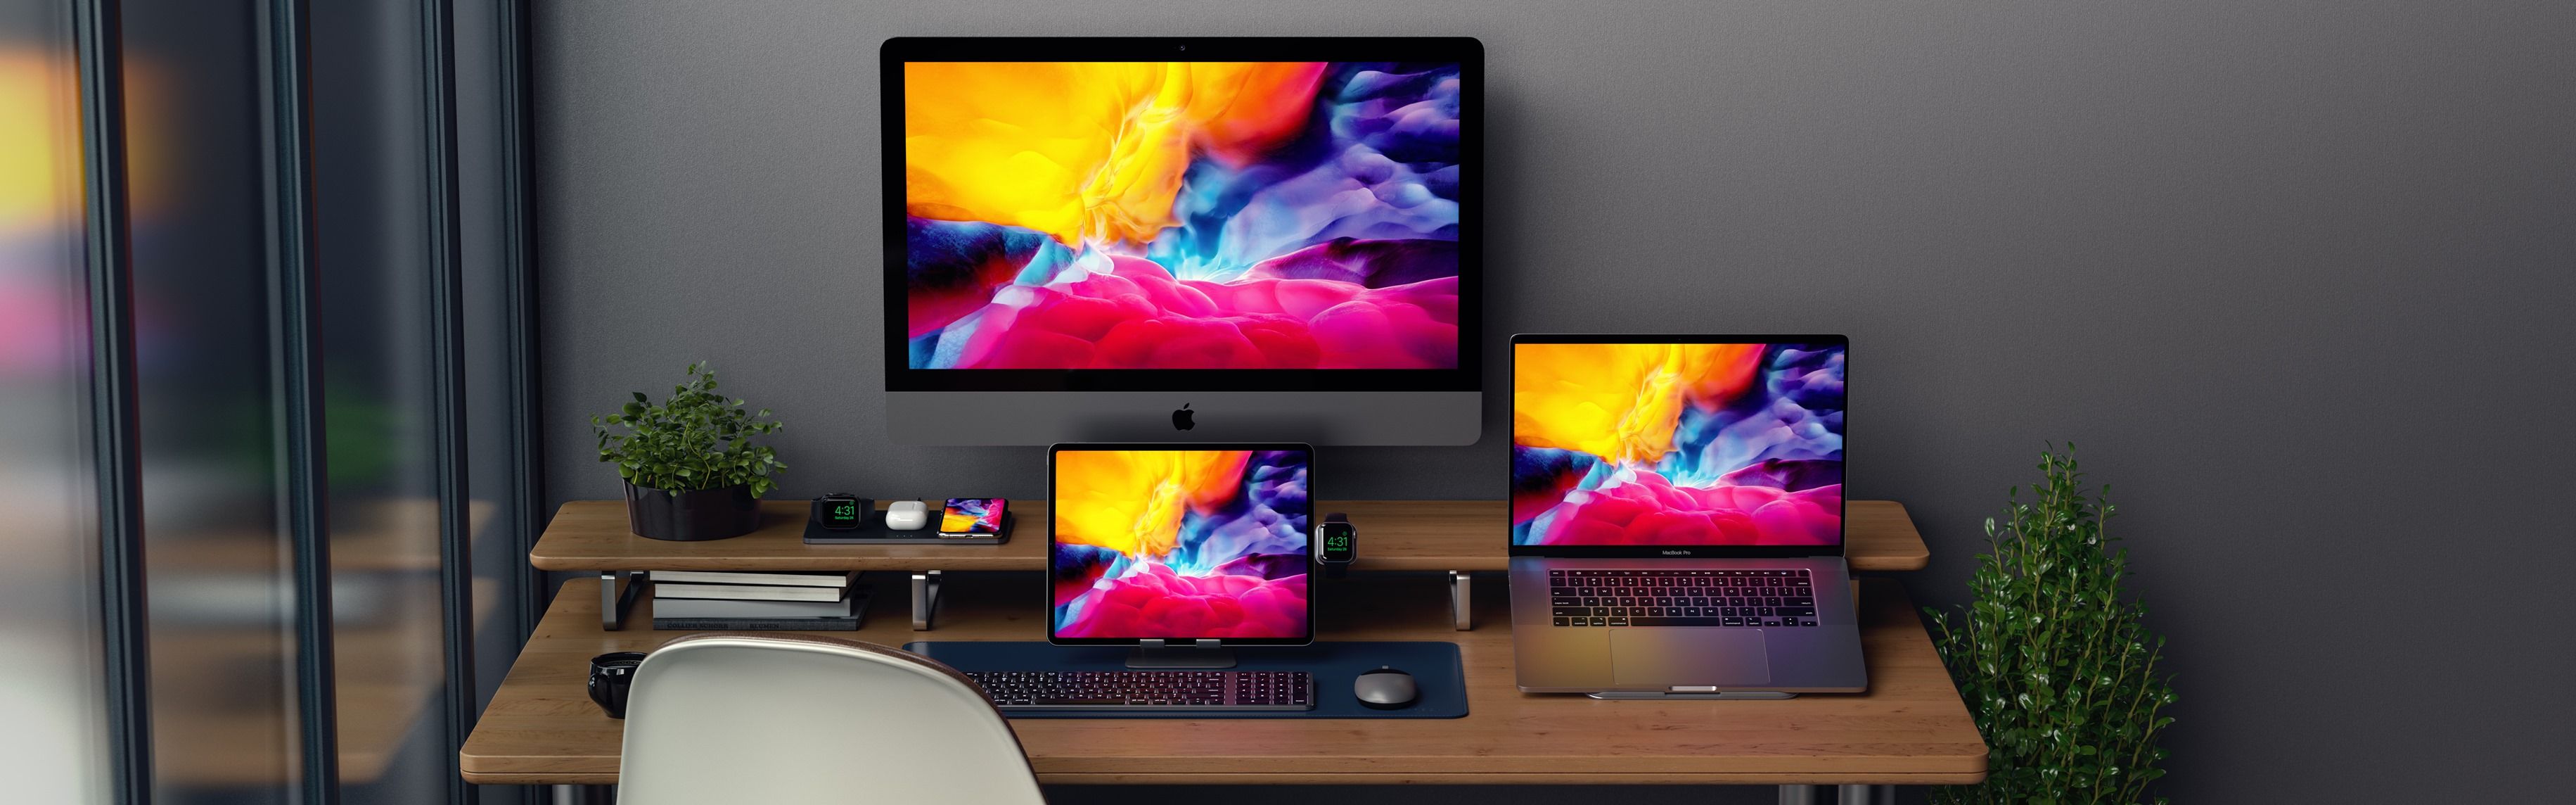 best mac for photo editing 2018